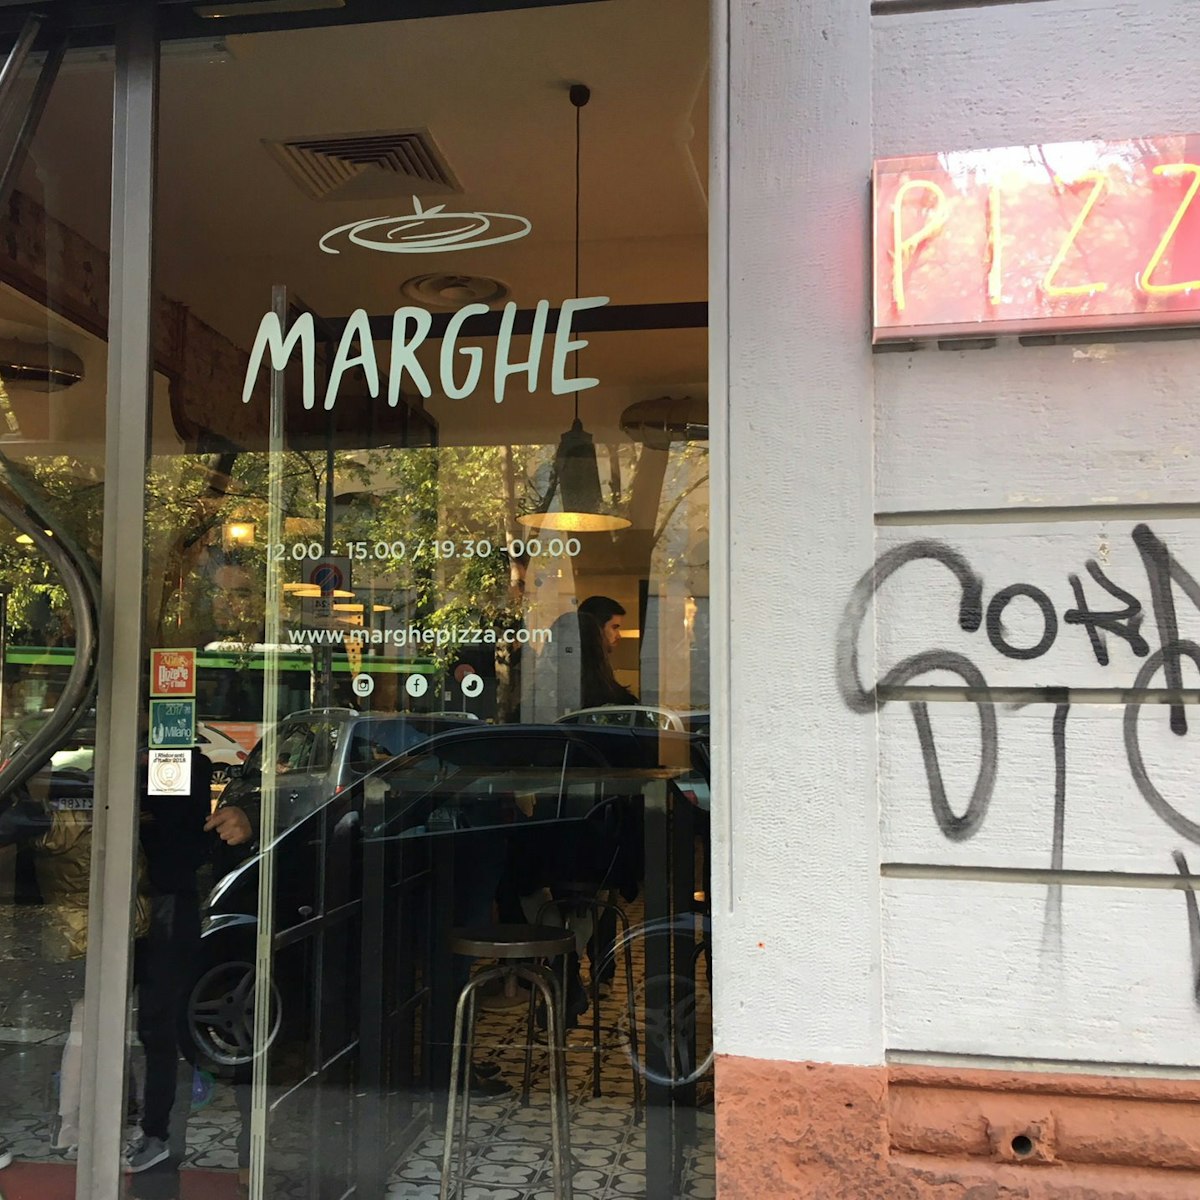 Window of the Marghe pizzeria